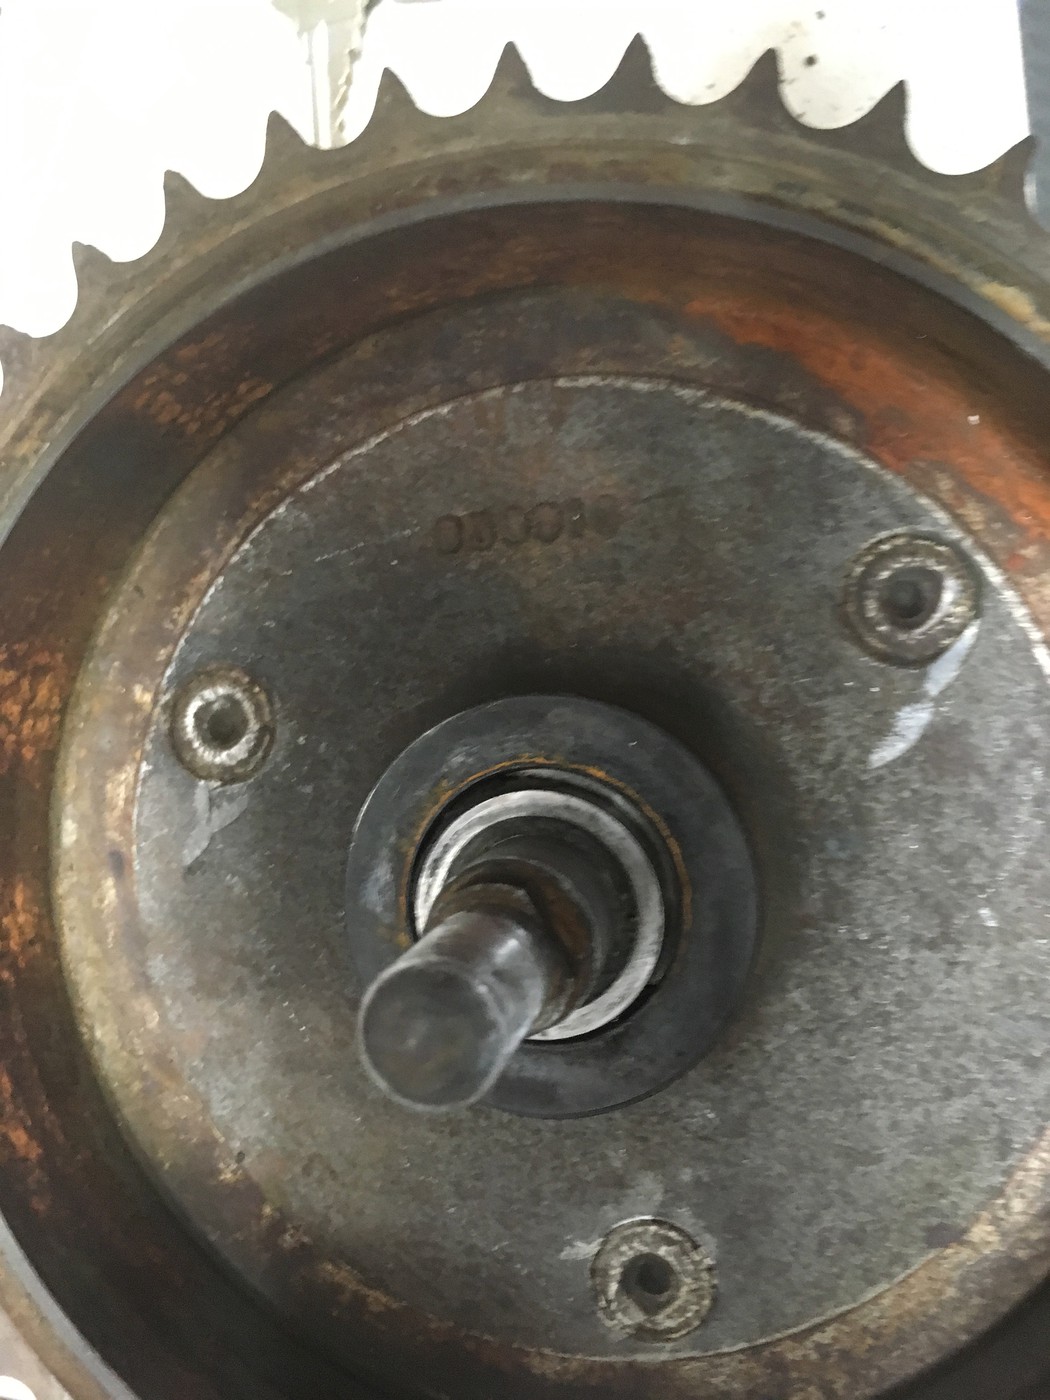 Early brake drum question